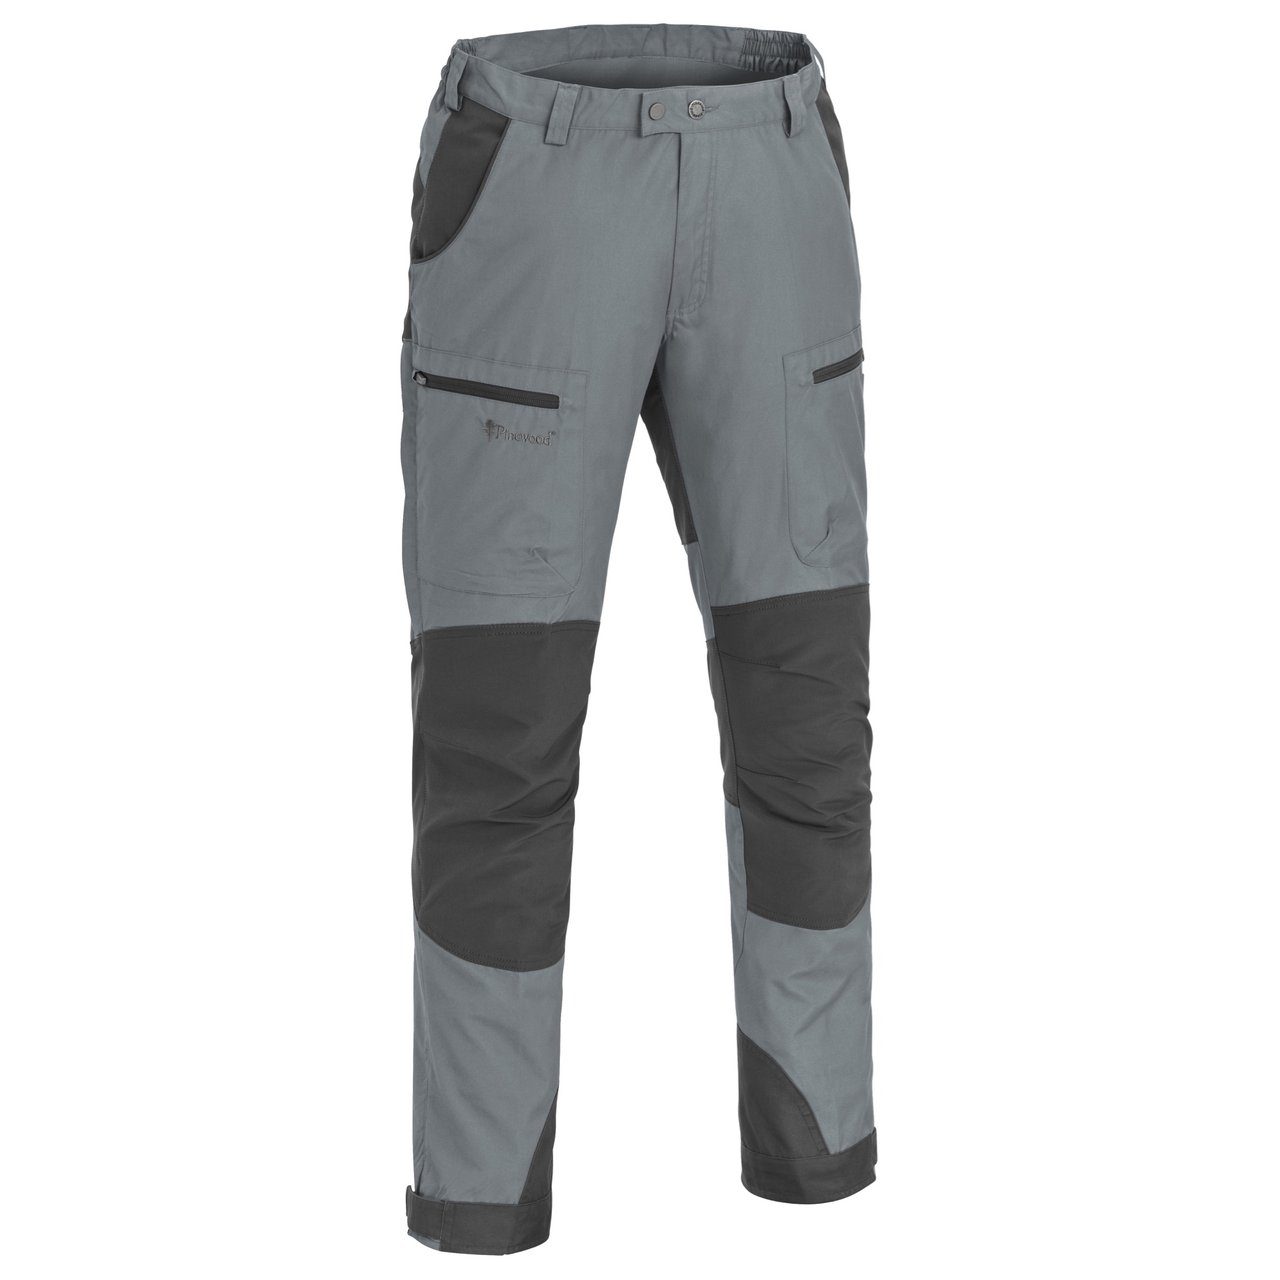 5085 365 01 Pinewood Caribou Tc Trousers Mens Storm Blue Dark Anthracite 2